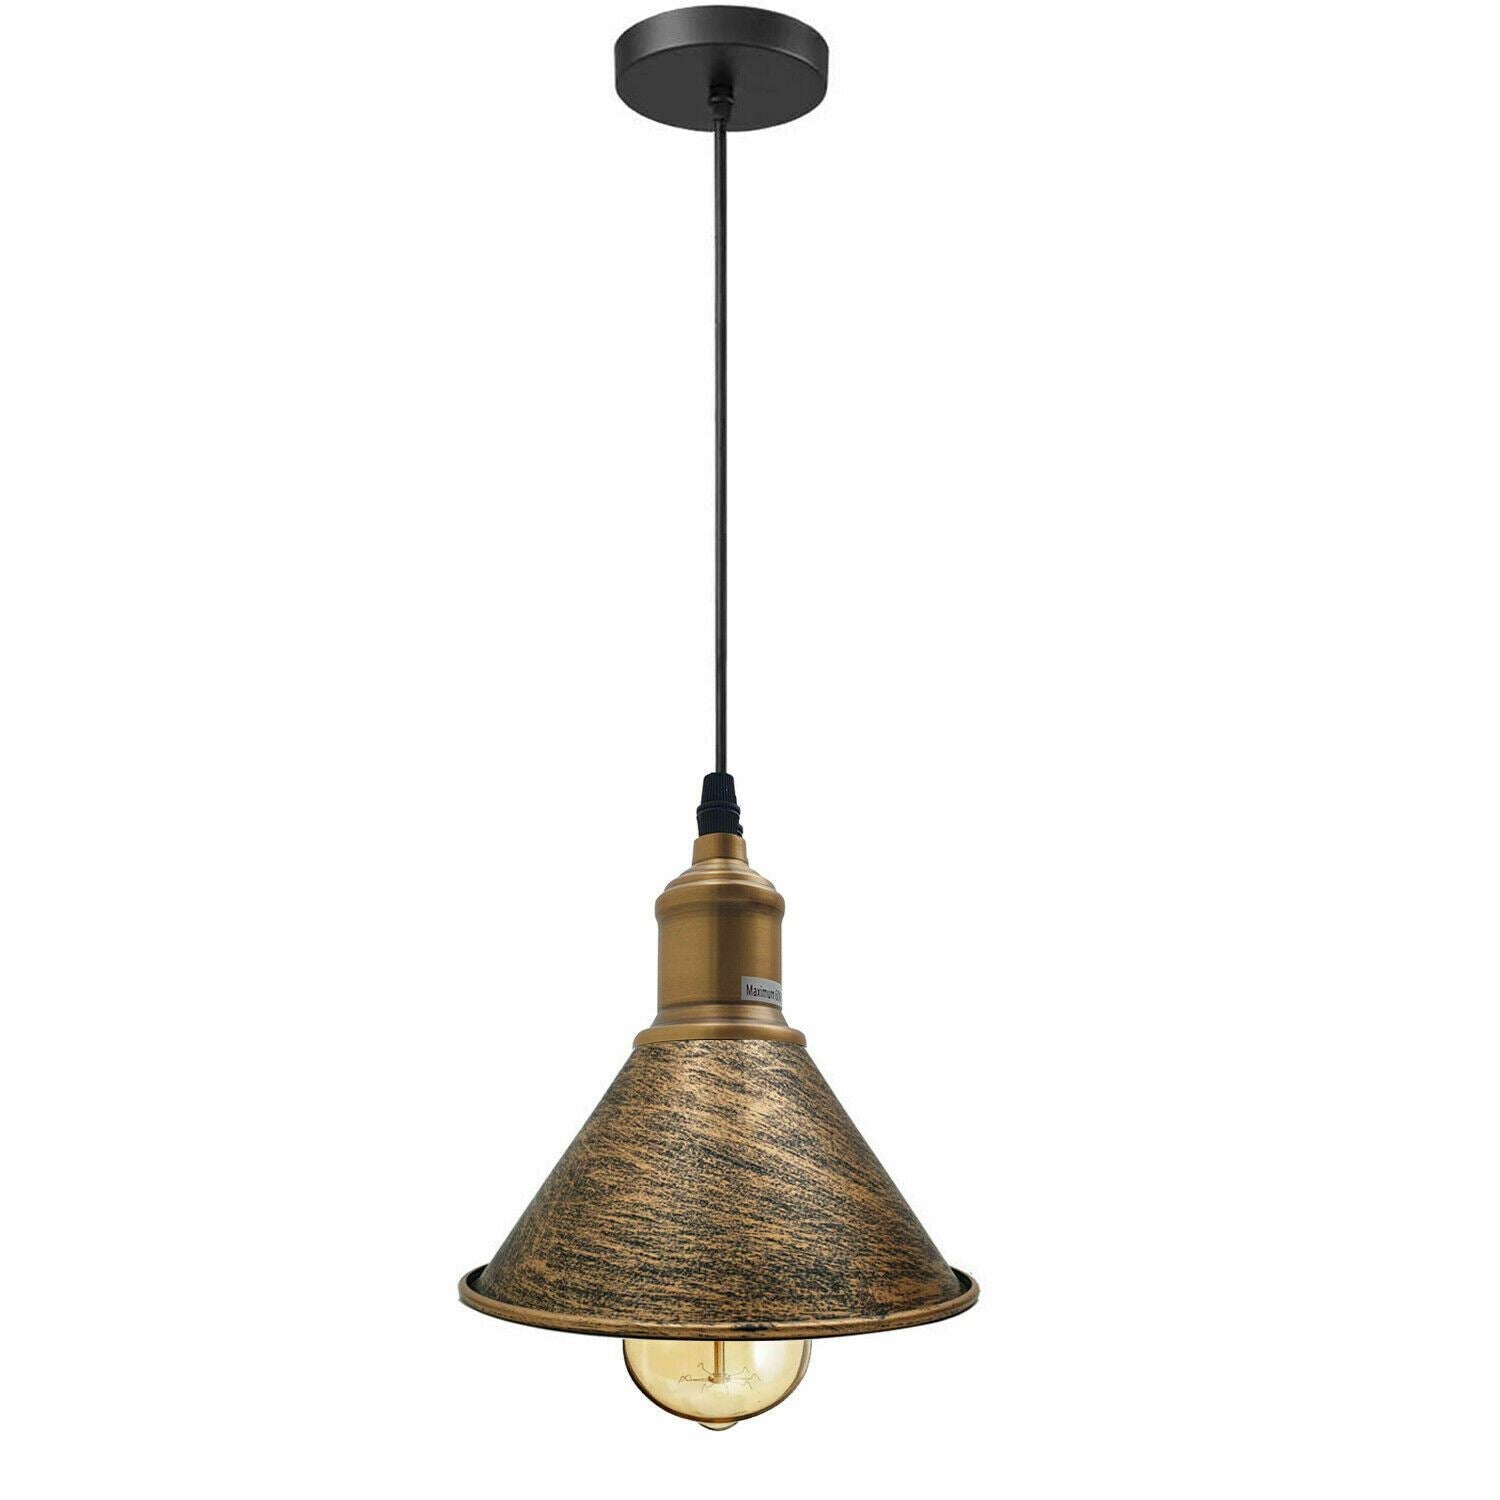 Vintage Cone Shade Rustic Ceiling Hanging Pendant Light